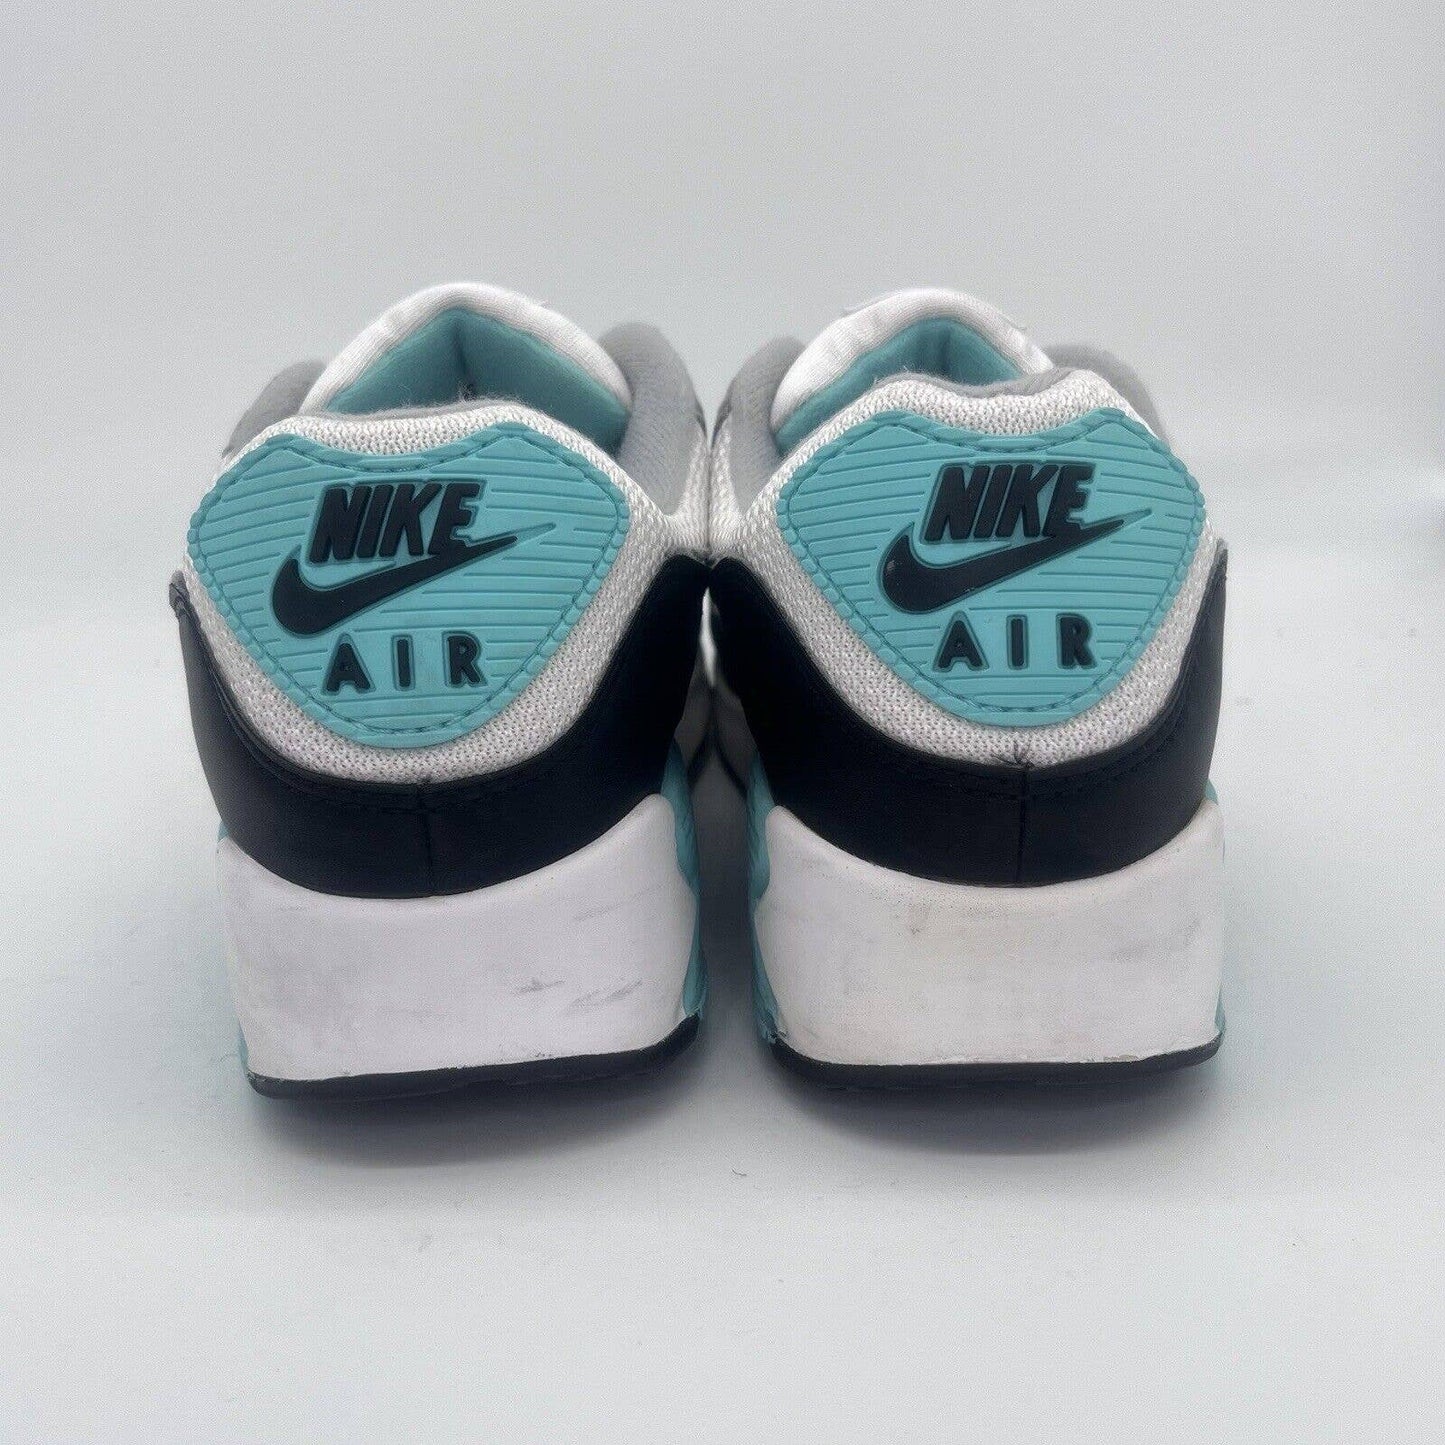 Nike Air Max 90 Hyper Turquoise Mens Size 10 CD0881-100 White Grey Sneakers 2020